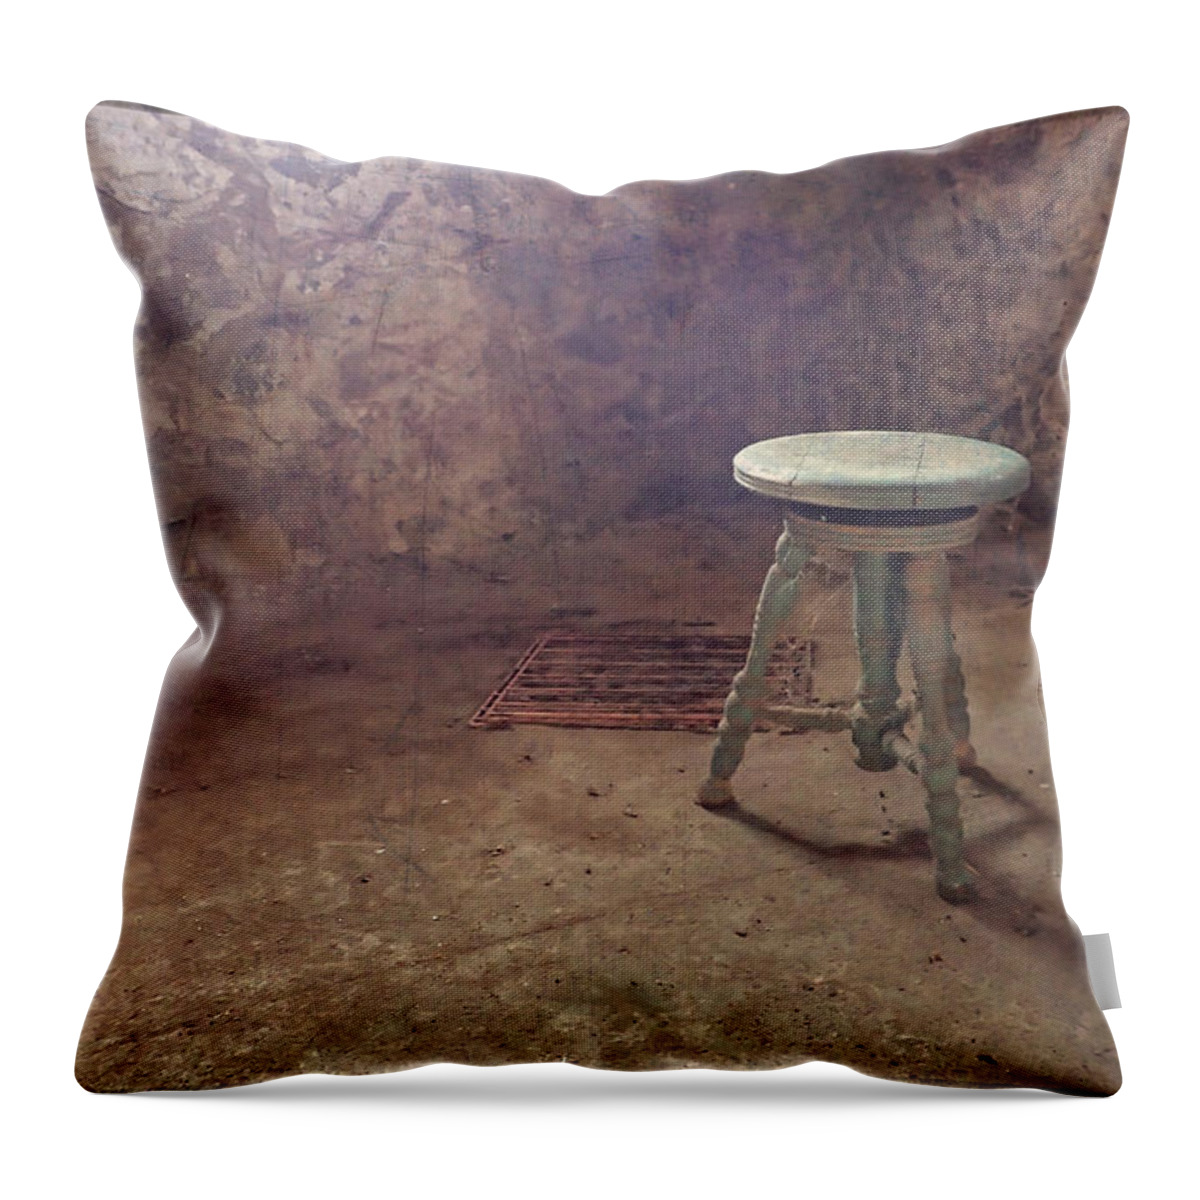 Basement Throw Pillow featuring the photograph The Empty Chair by Lars Lentz